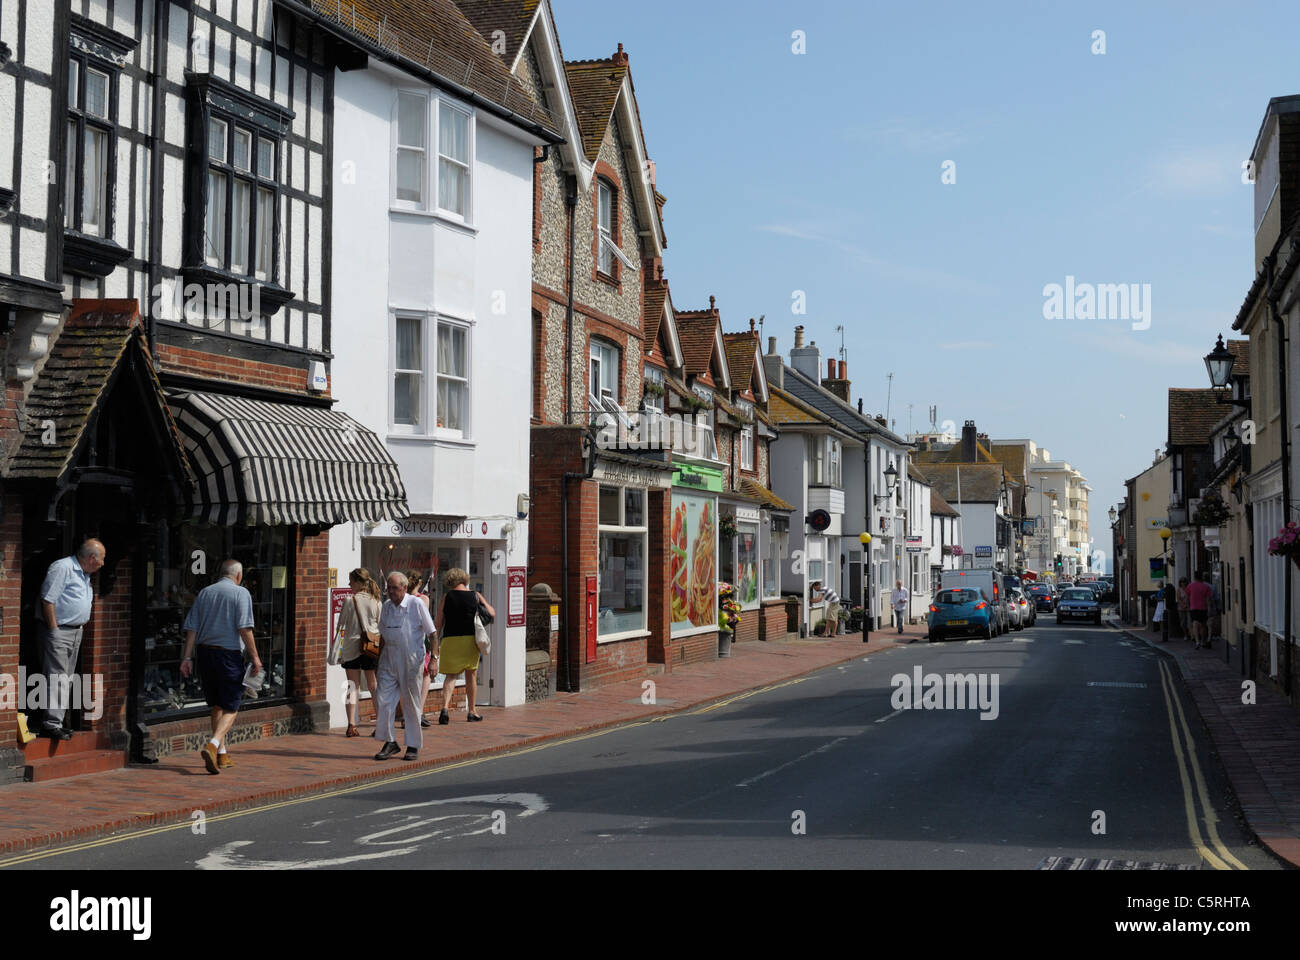 The High Street at Rottingdean, East Sussex, England. Stock Photo